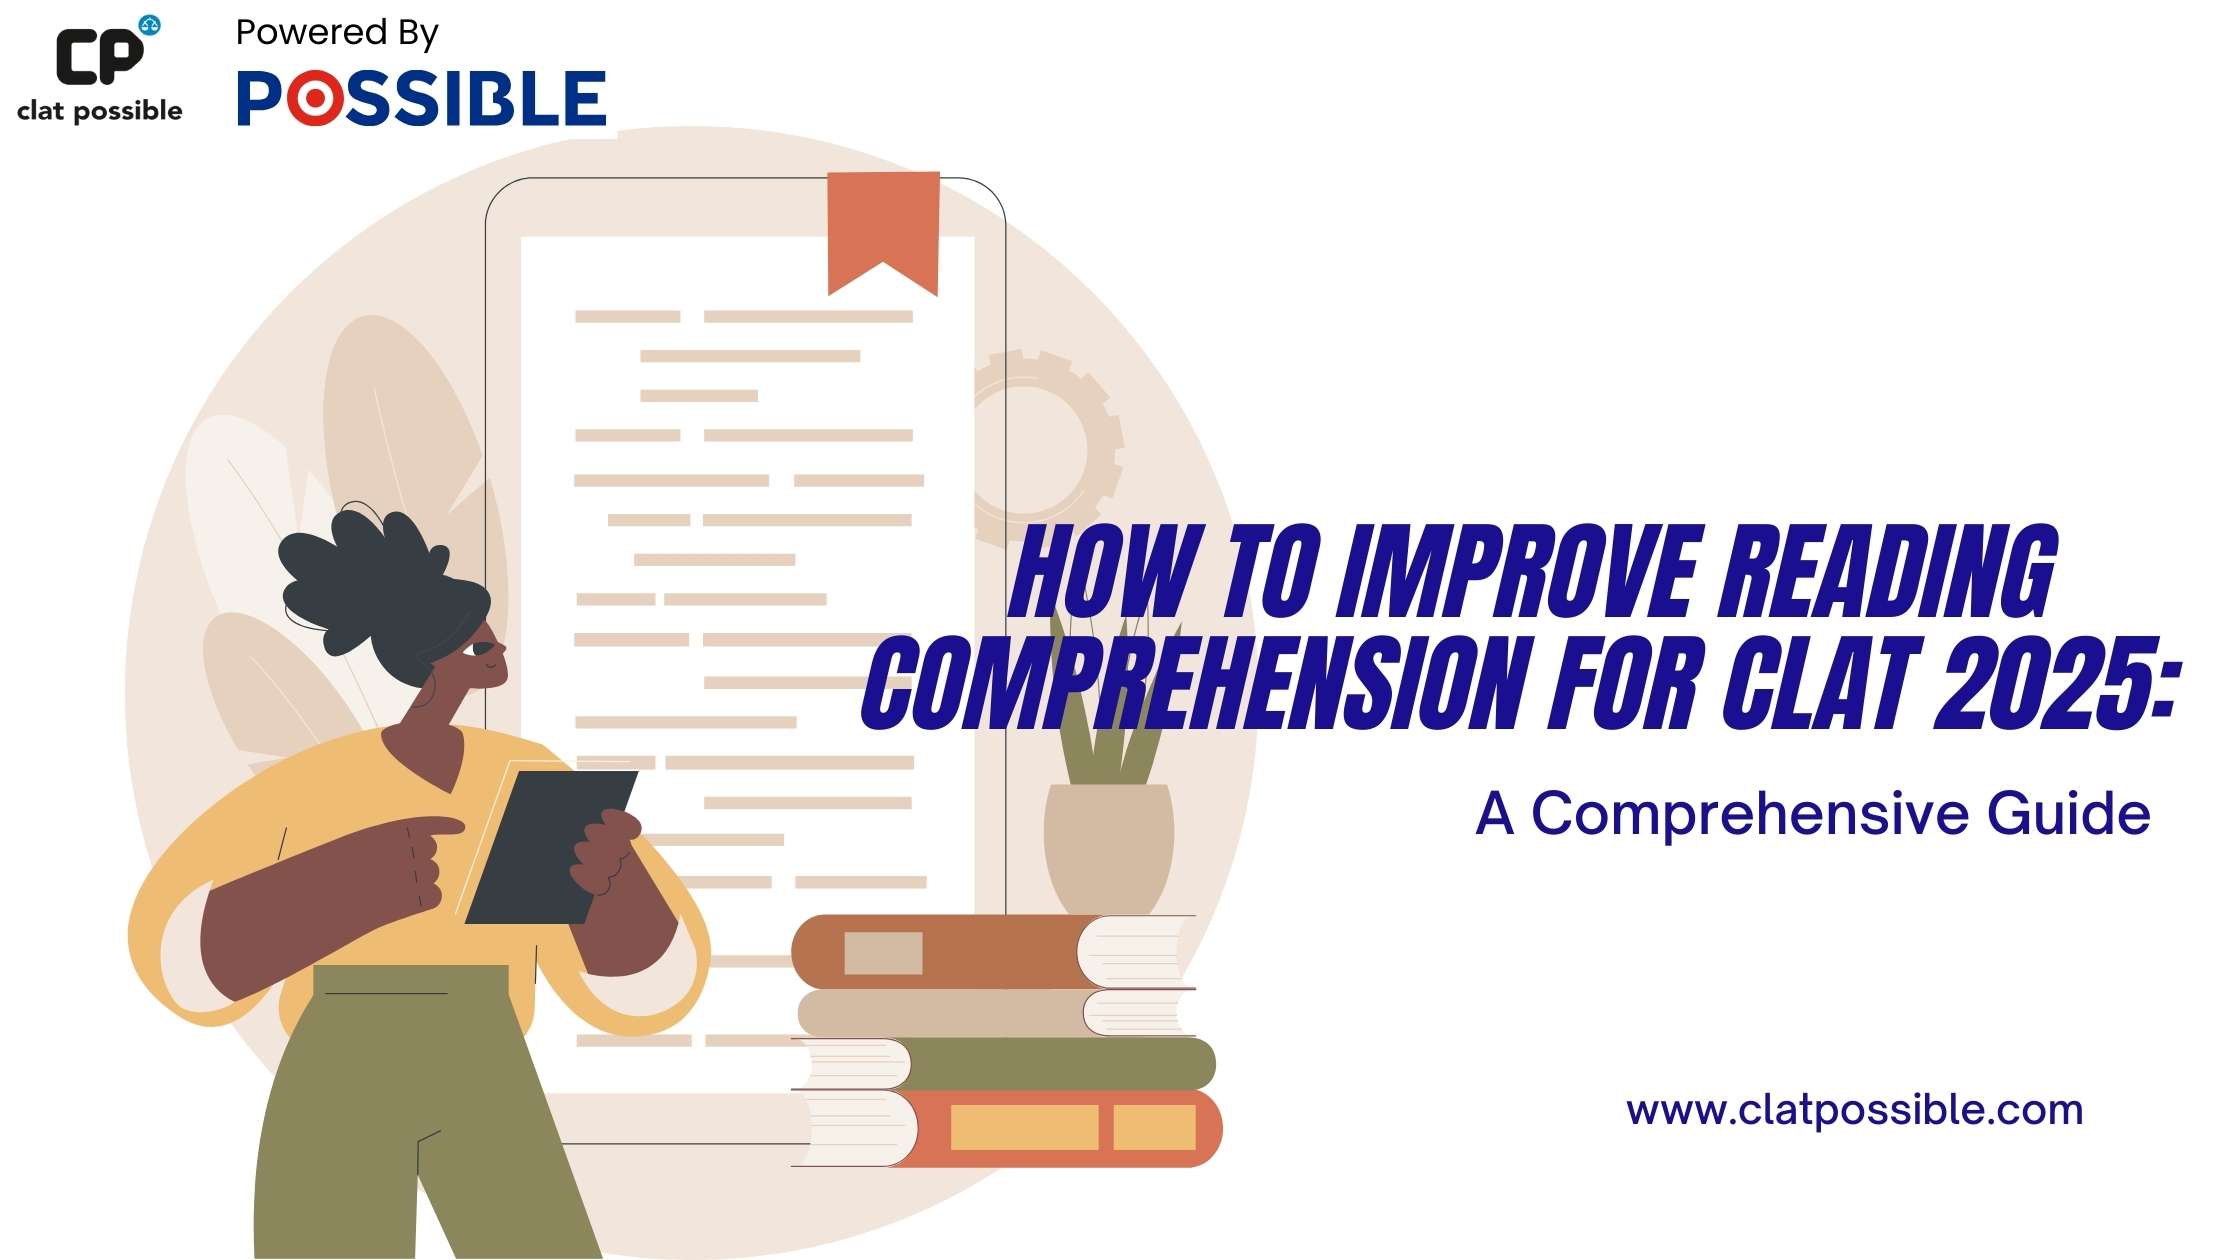 How to Improve Reading Comprehension for CLAT 2025: A Comprehensive Guide